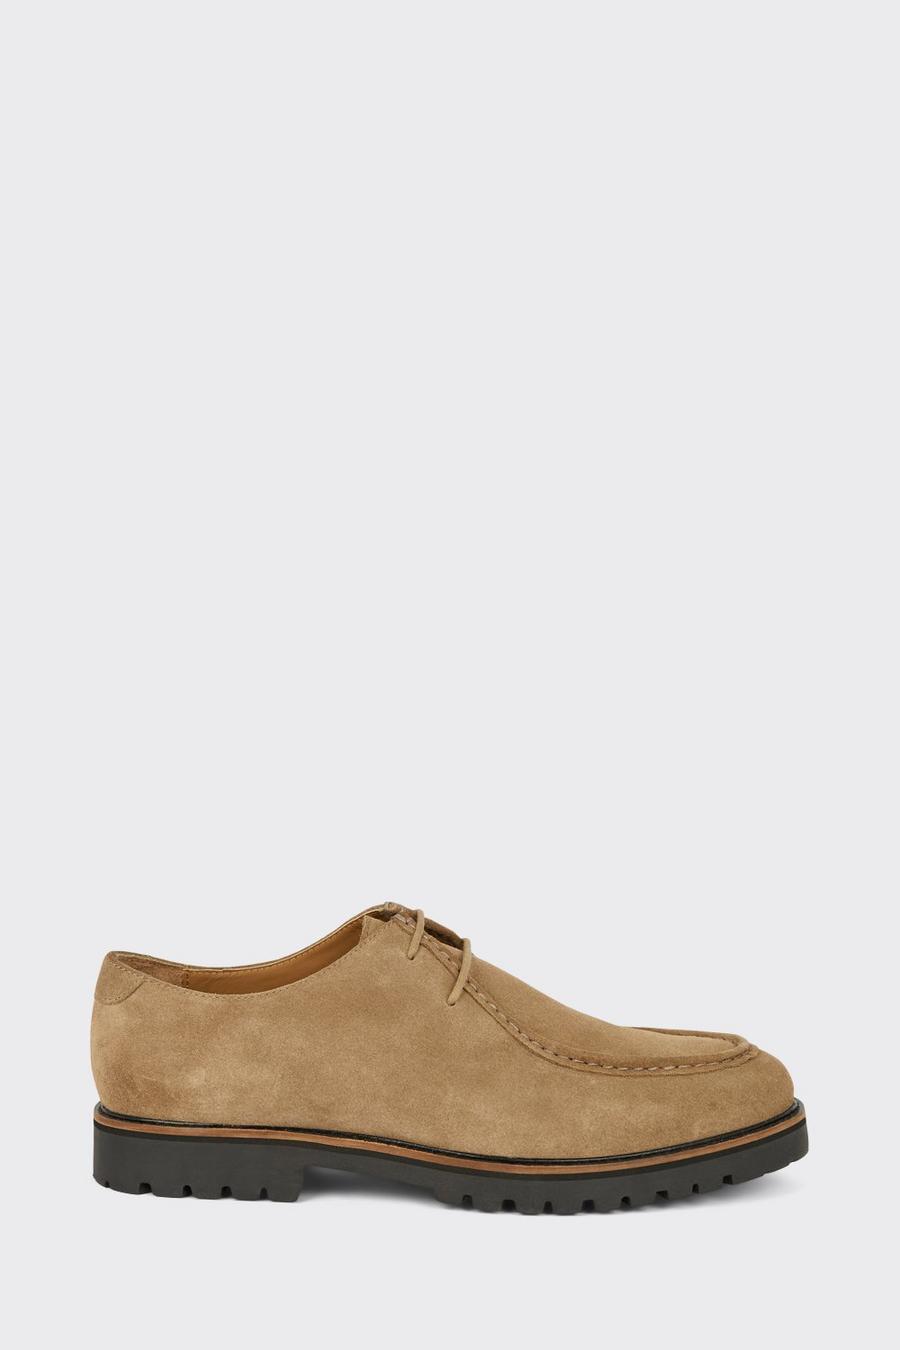 Suede Beige Boat Shoes